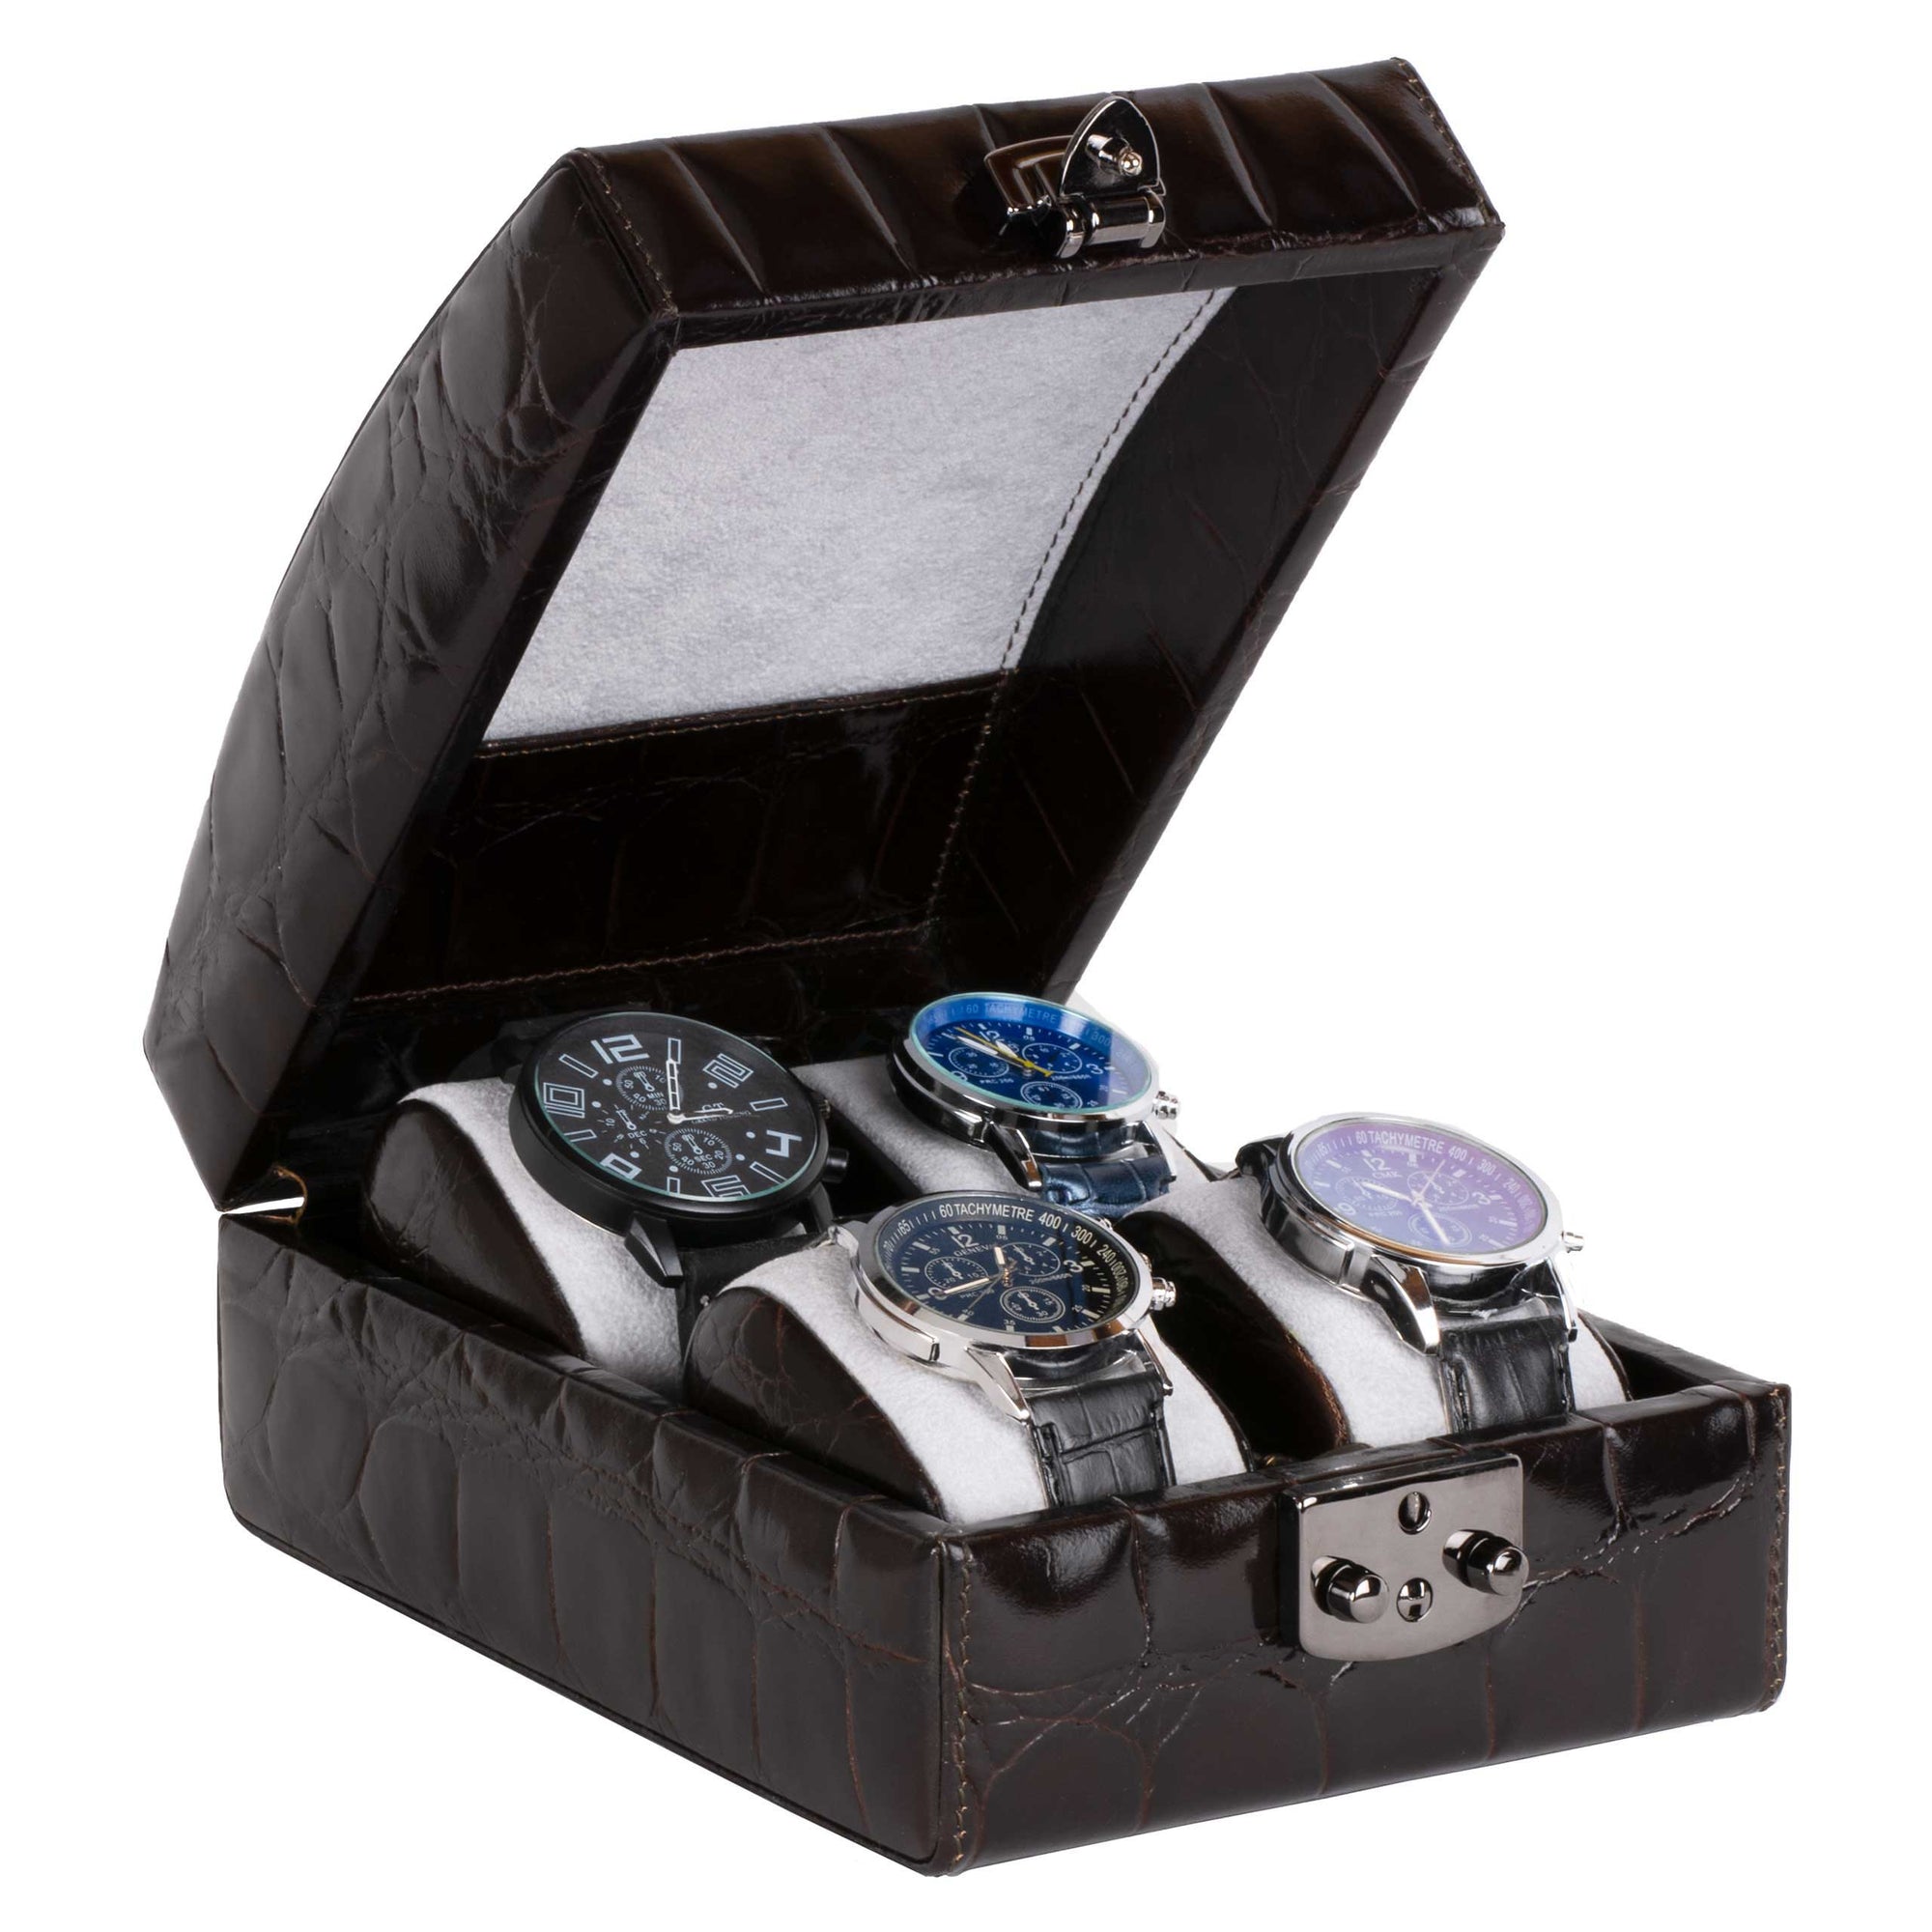 DiLoro Italian Leather Four Watch Case Box in Dark Brown Croc Print  - Open (watches not included)